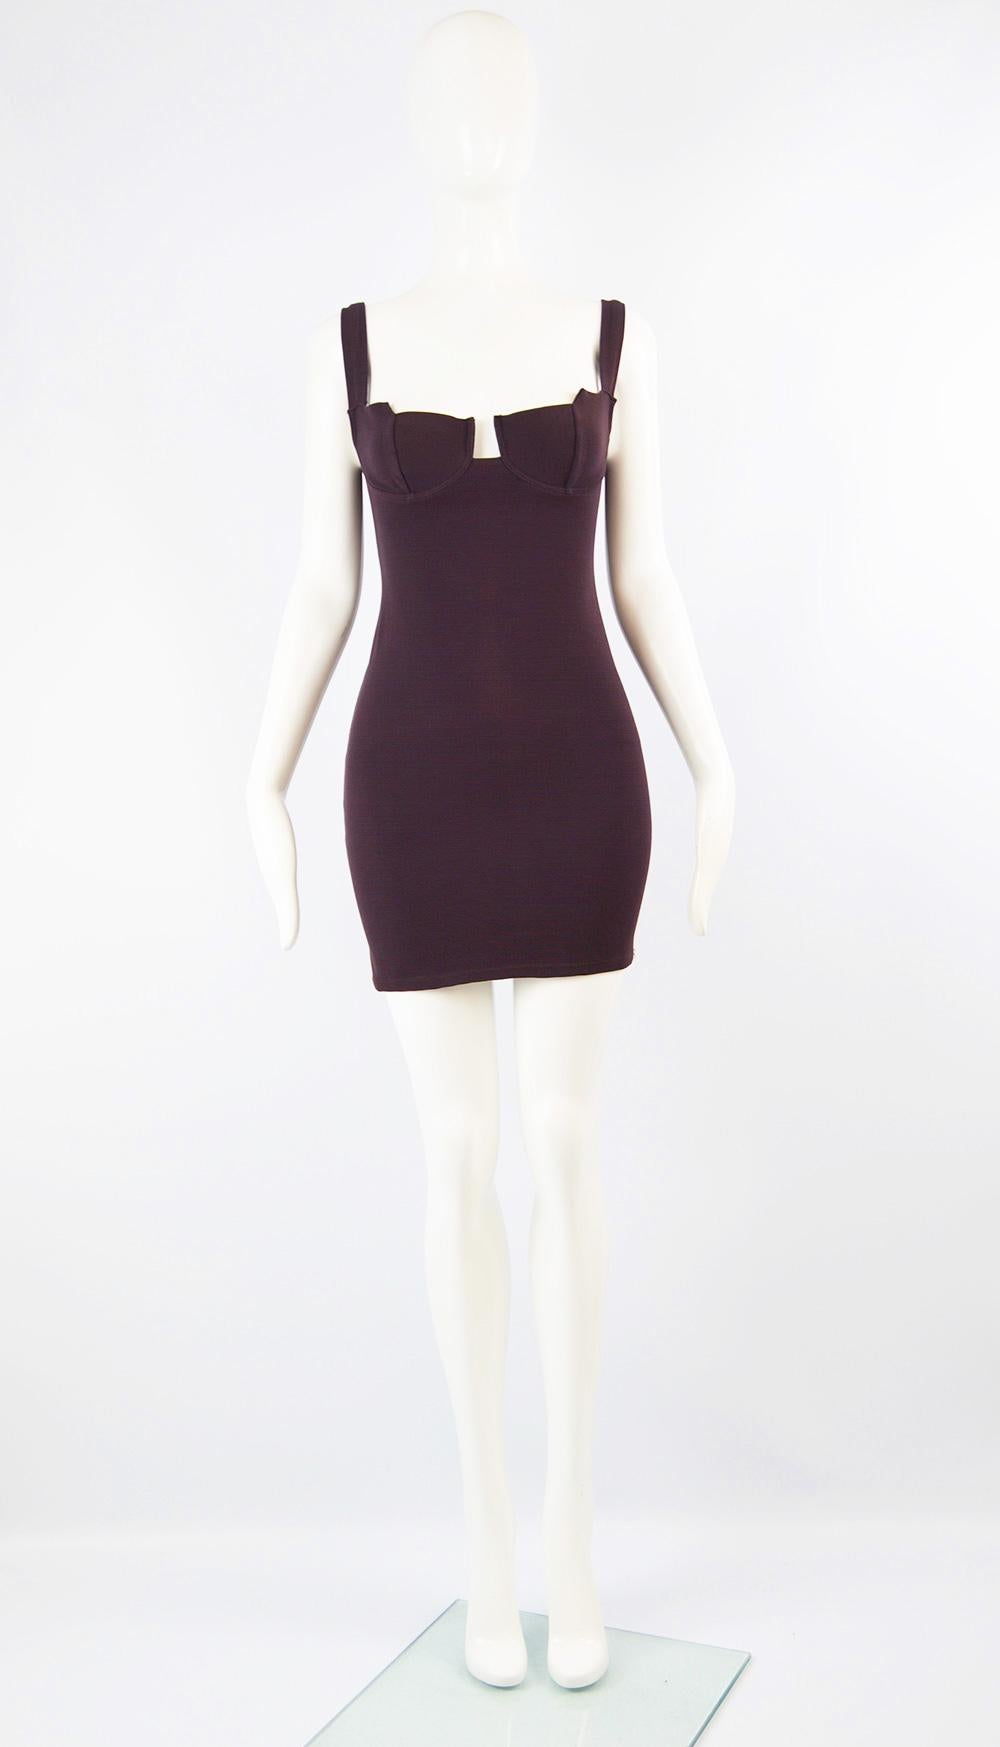 A sexy and chic vintage women's mini dress from the 90s by high quality but little known French fashion designer, Andrea Templer. In a dark aubergine colored, stretchy ribbed lycra and polyamide blend that gives a great body conscious fit which